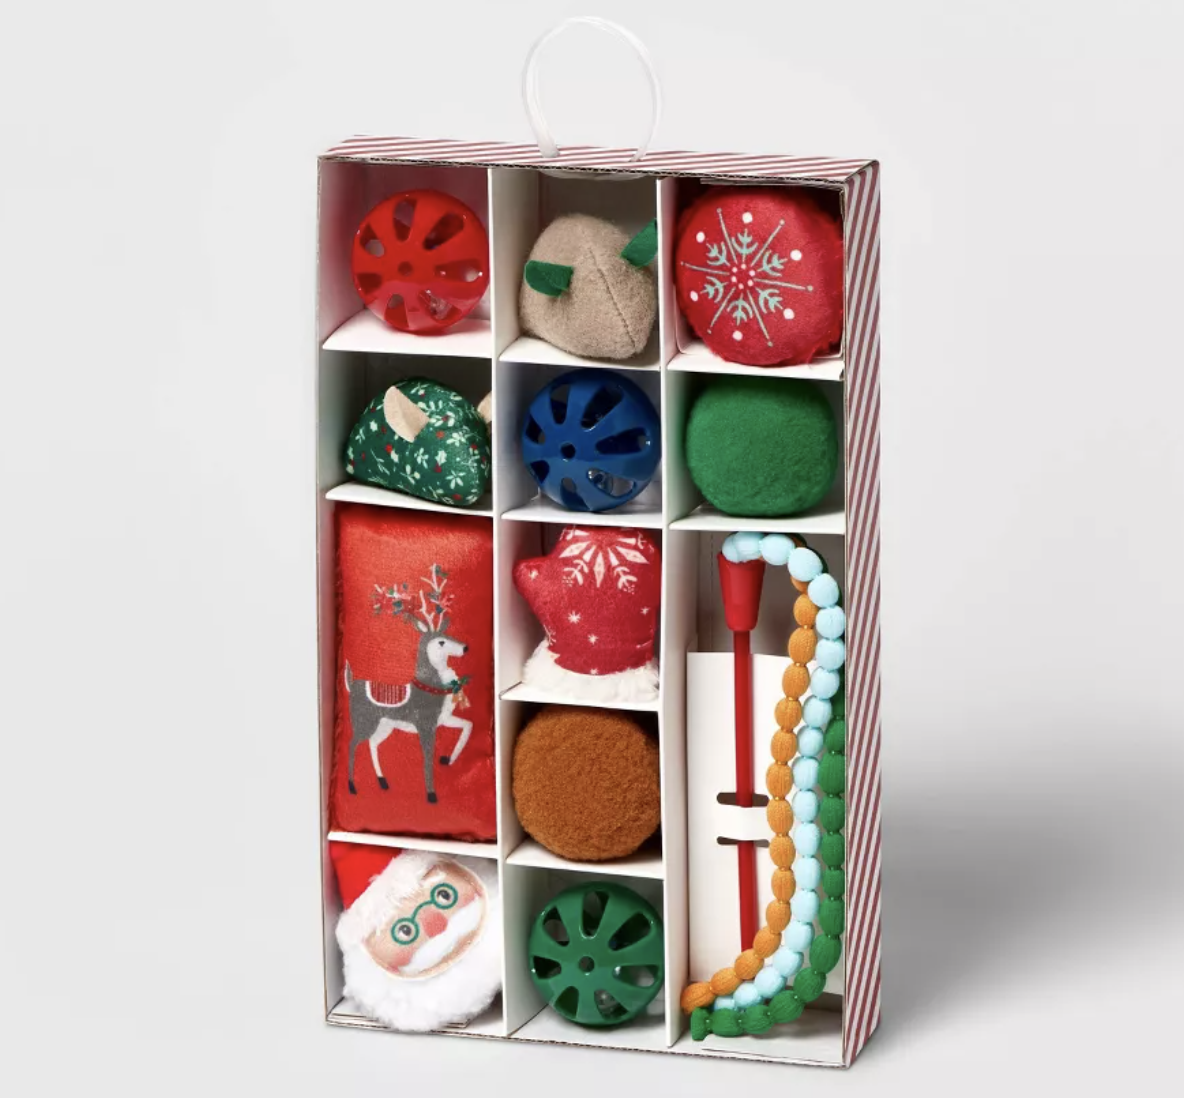 A box containing 12 small holiday themed cat toys